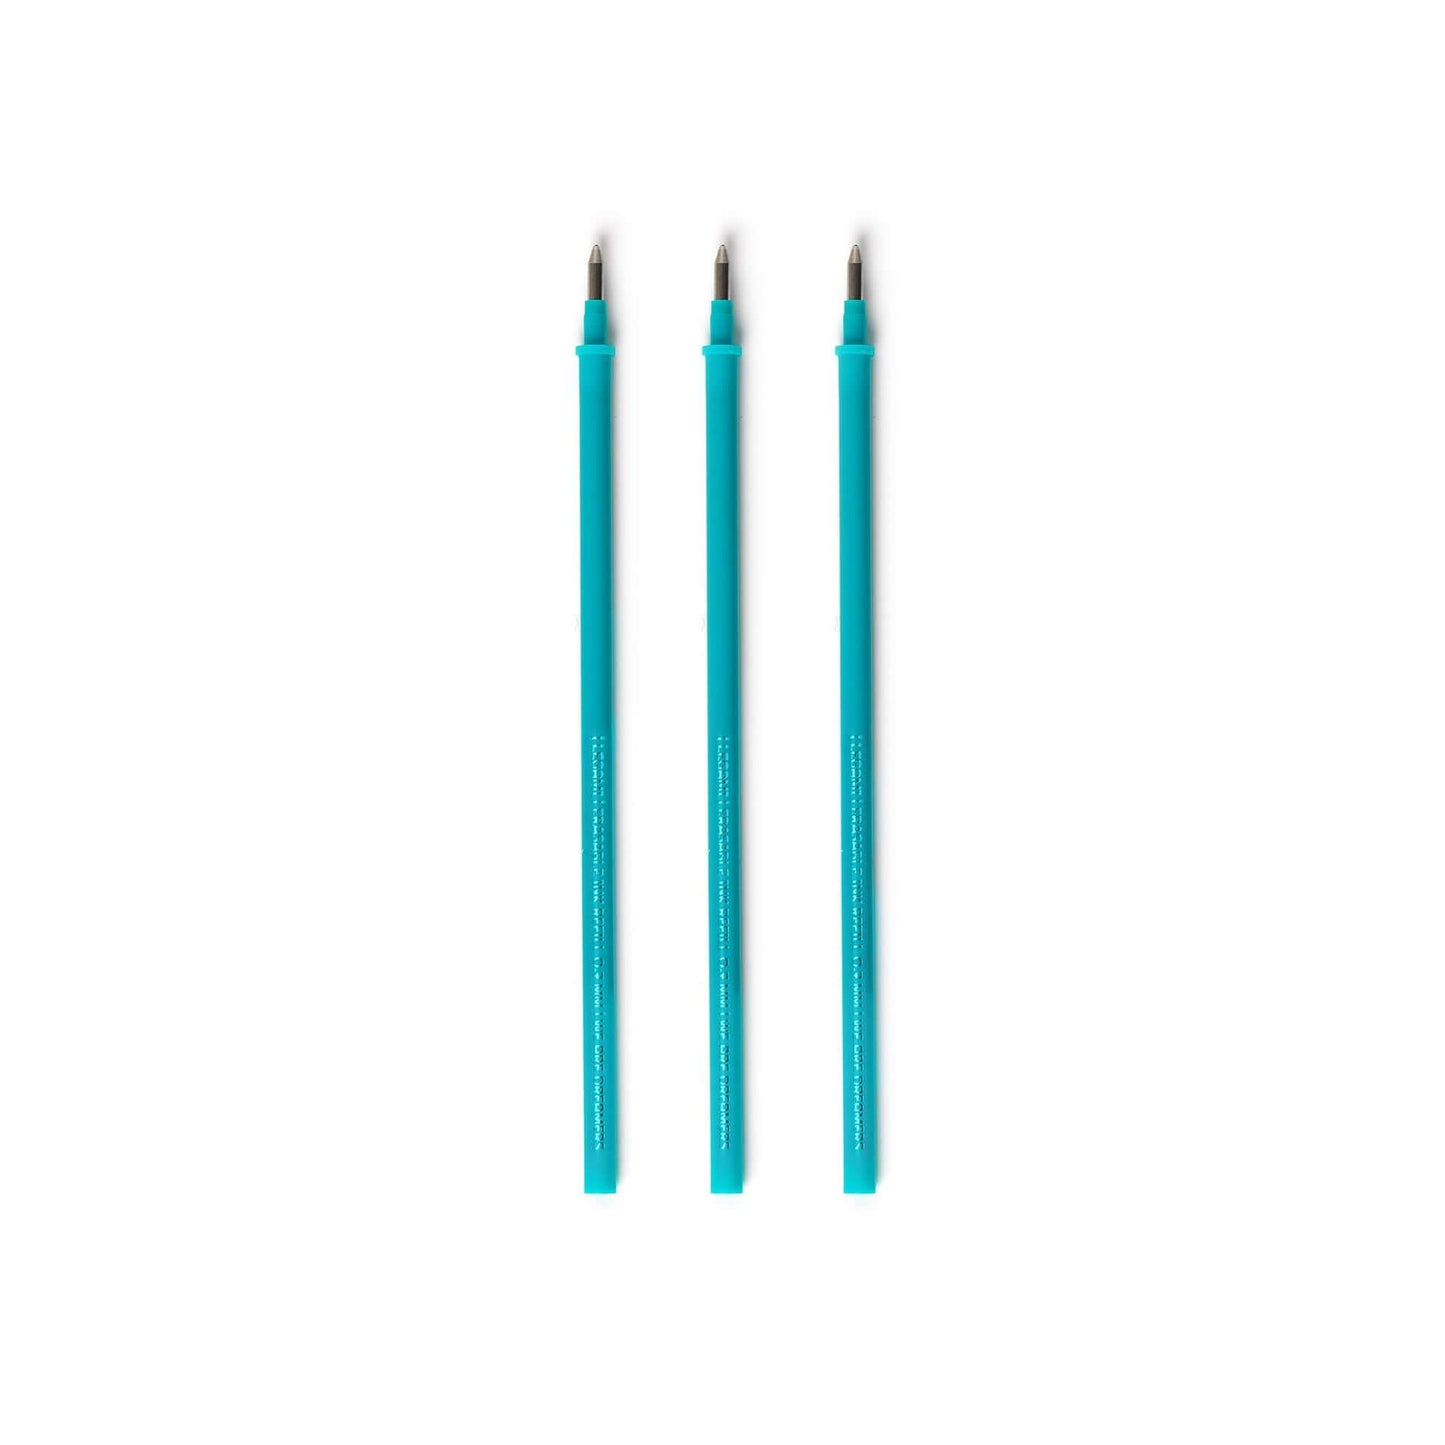 3 Turquoise Legami Erasable Pen Refills without packaging